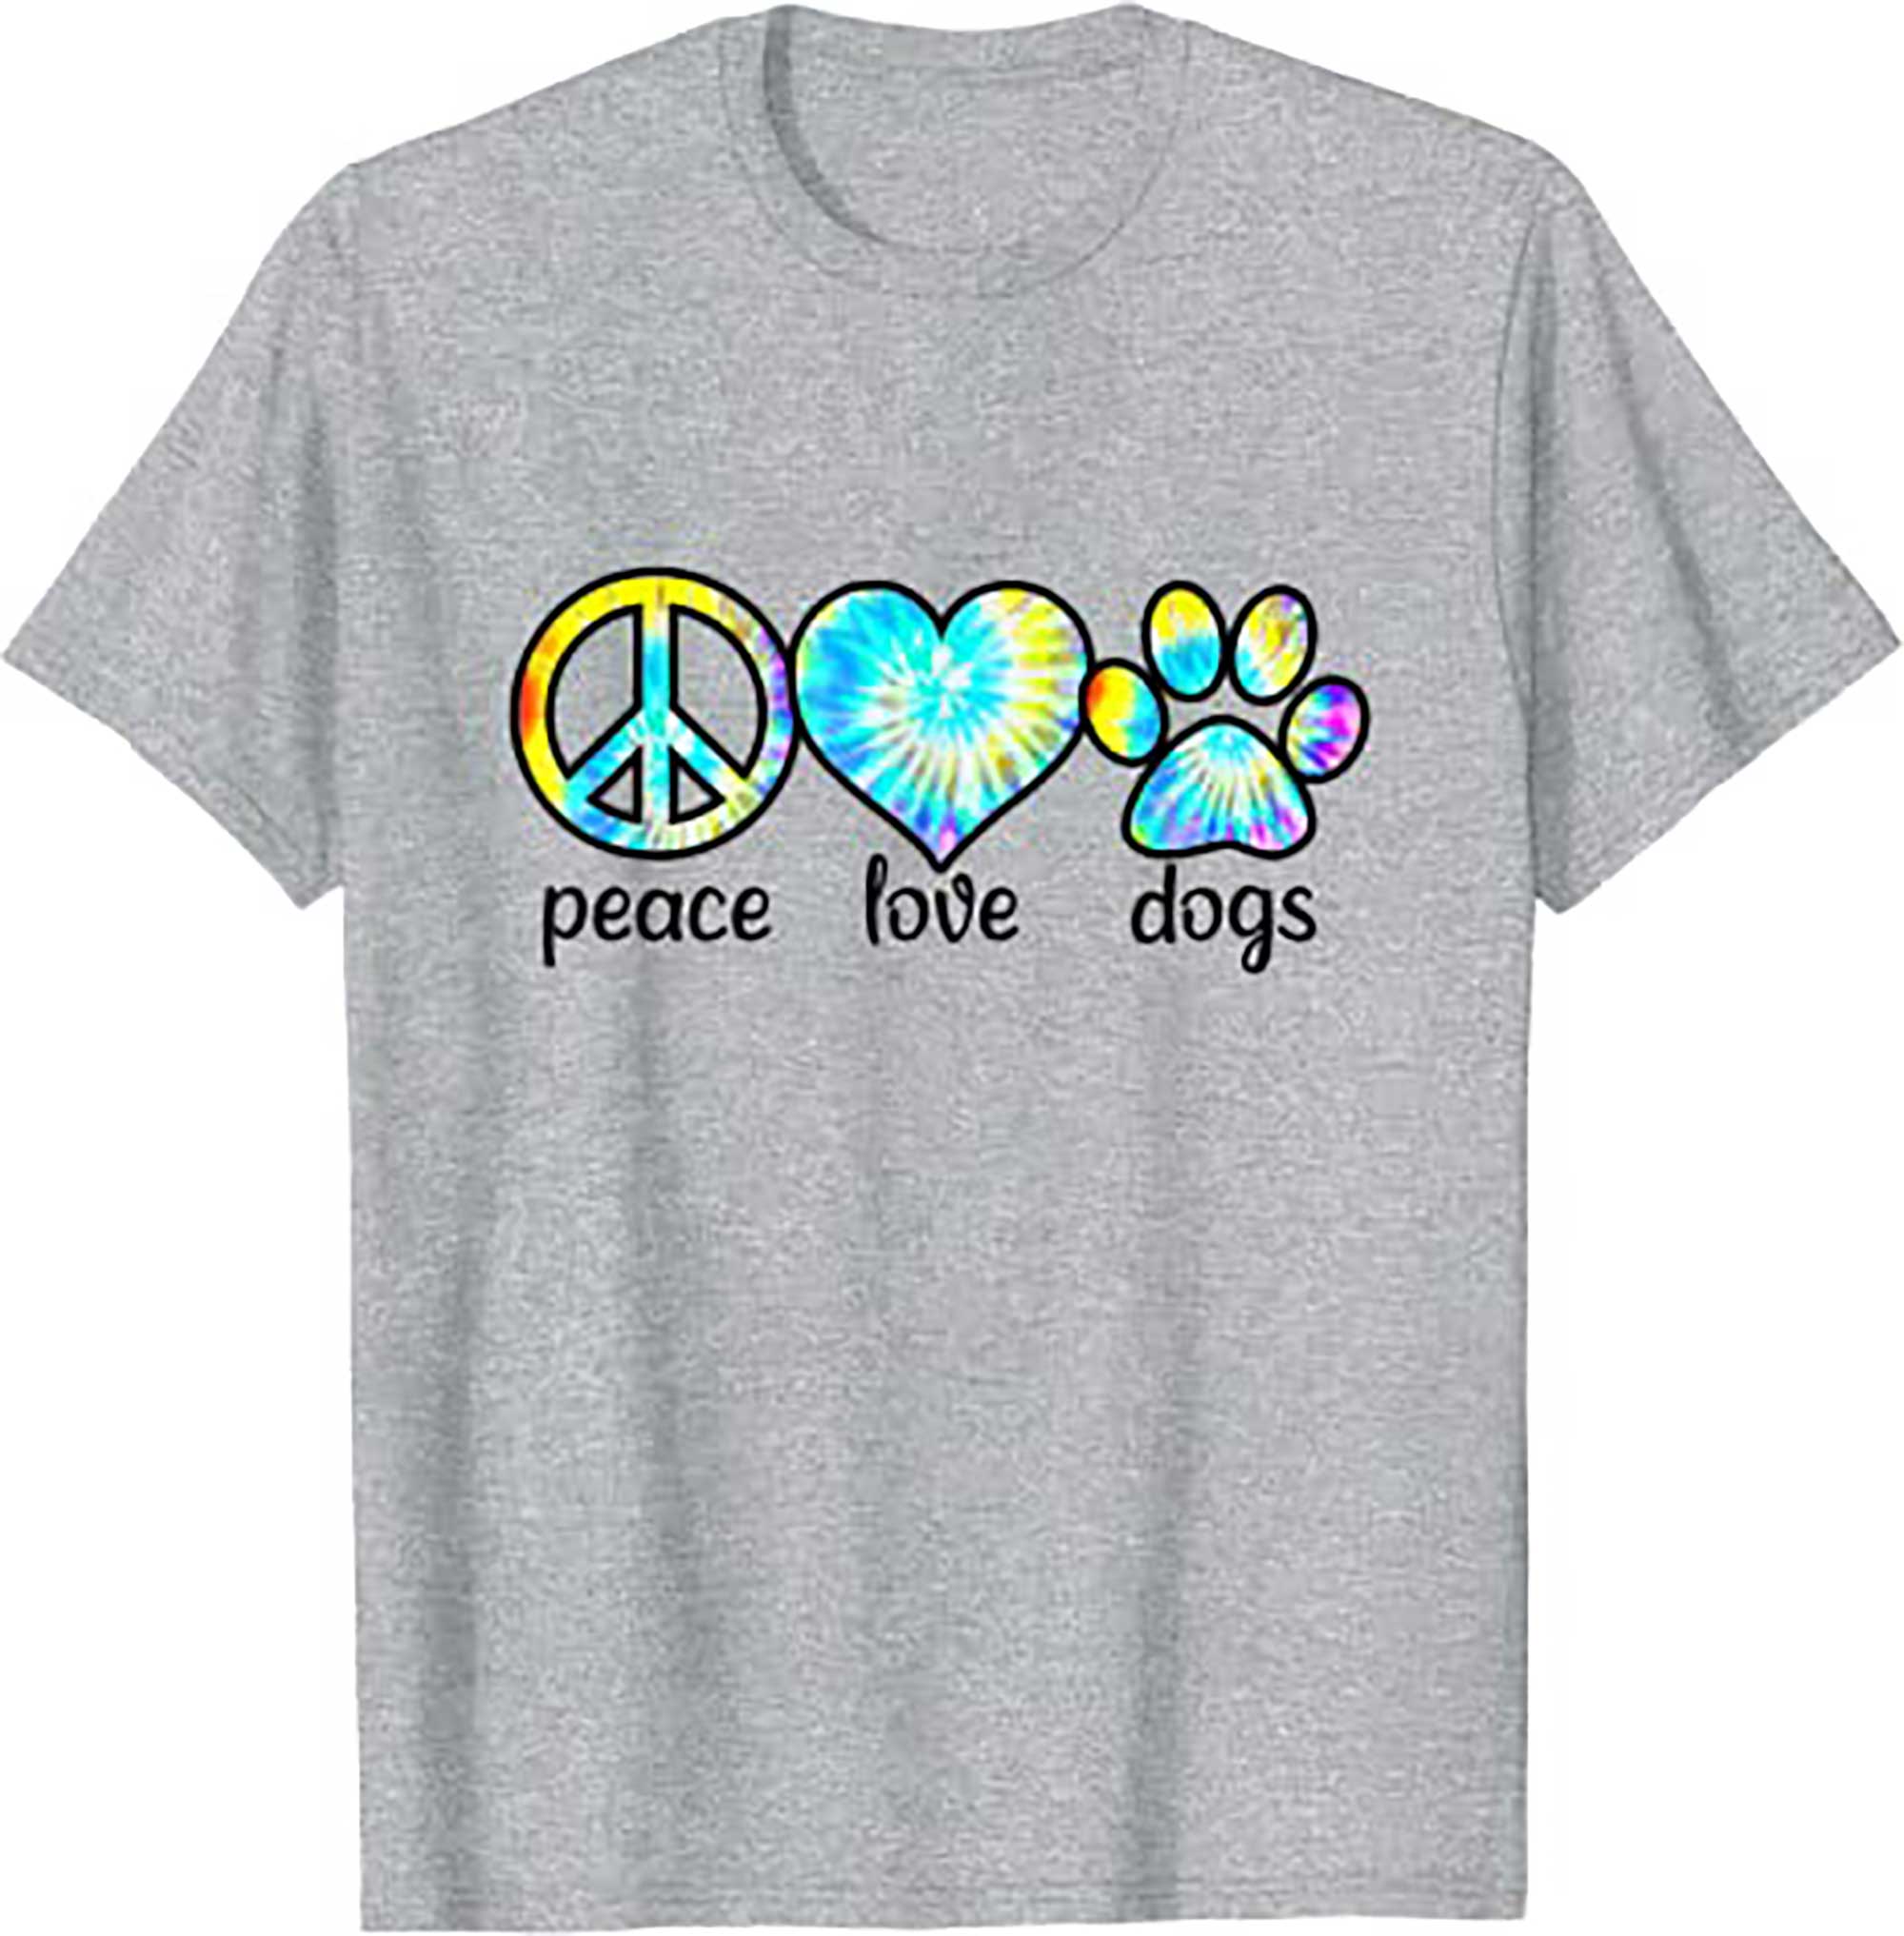 Dog Love Shirt for Mothers Day Gift Peace Love Dogs Tie Dye T Shirt